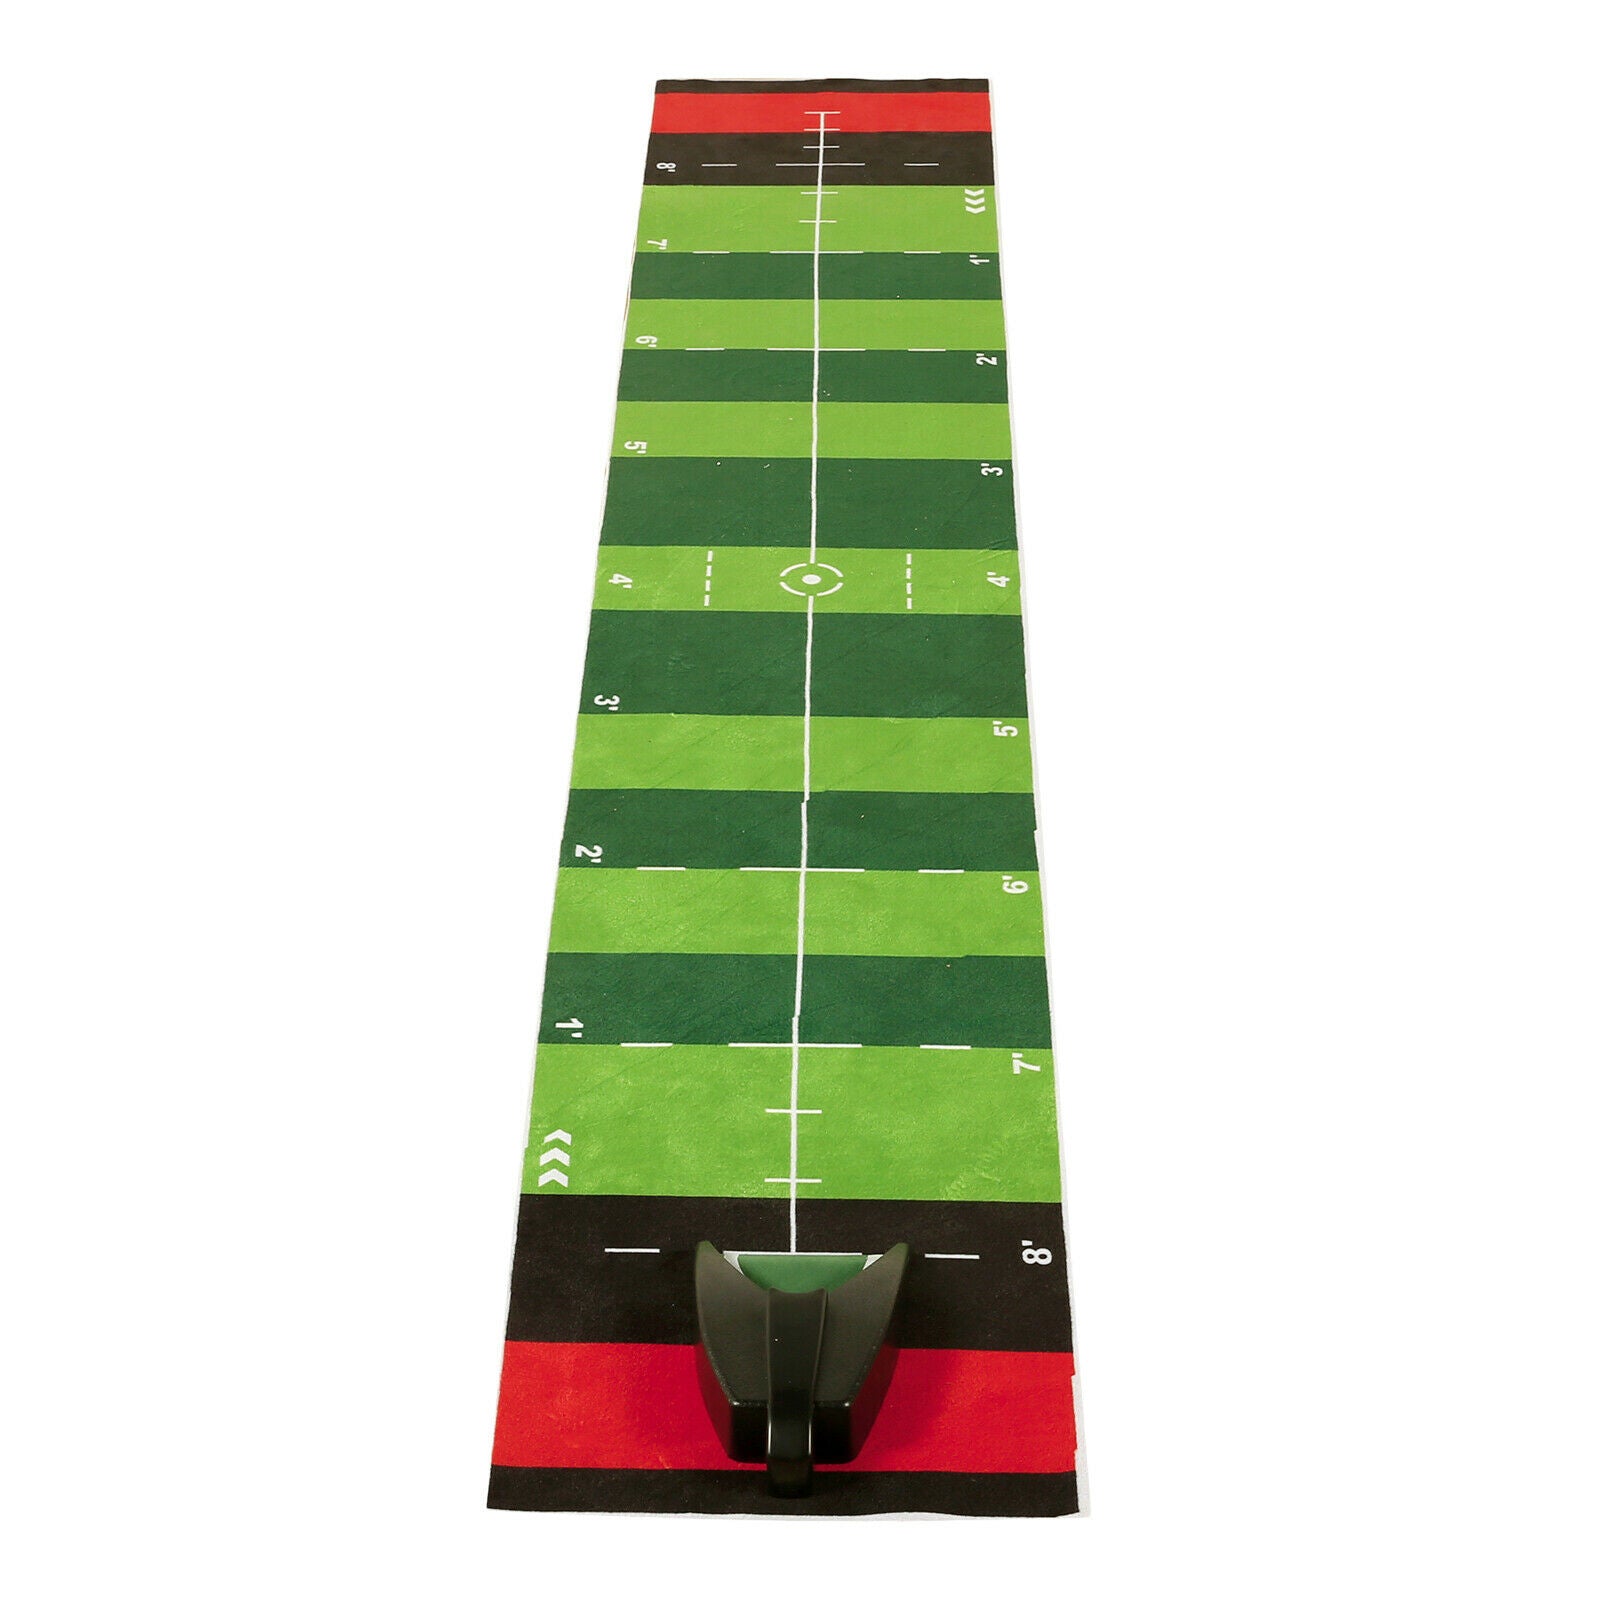 Portable Indoor Golf Putting Green Mat Practice Game and Gift Home Use